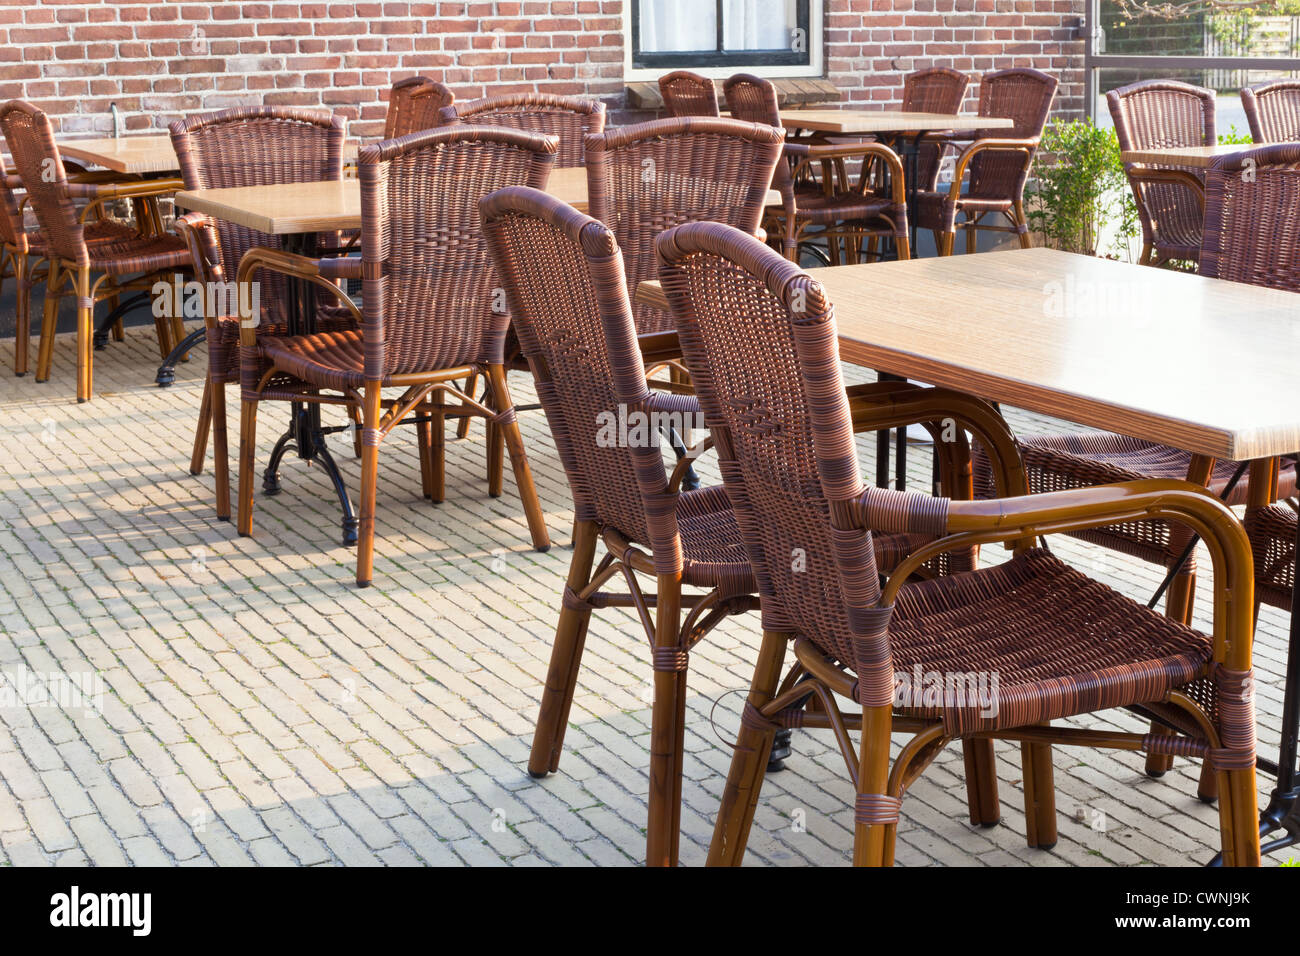 Outdoor Summer Cafe With Wicker Furniture Horizontal Shot Stock